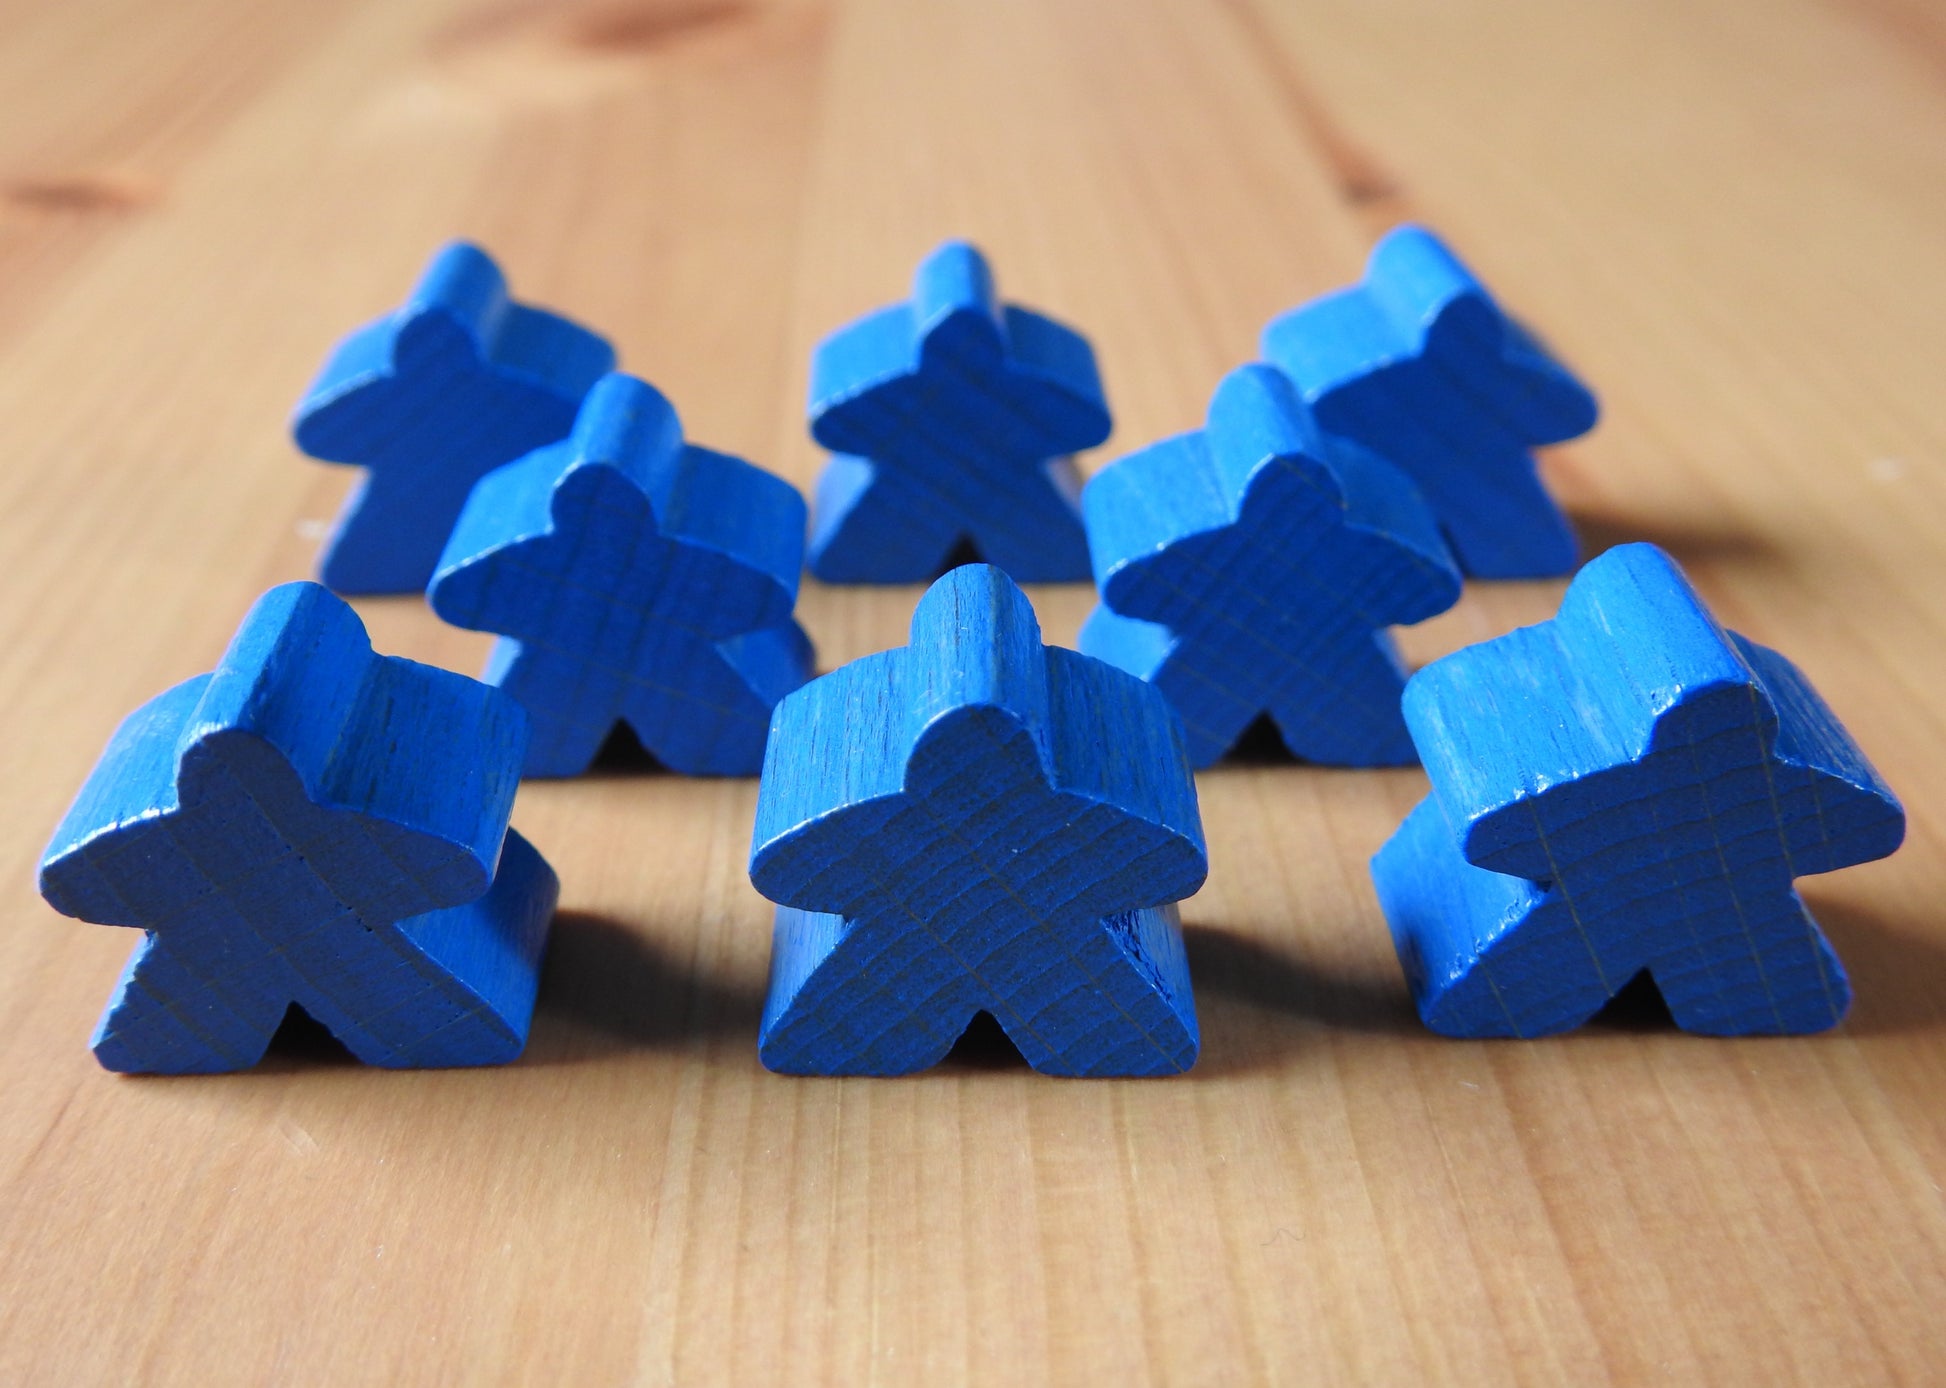 Close-up view of the blue set of 8 meeples.